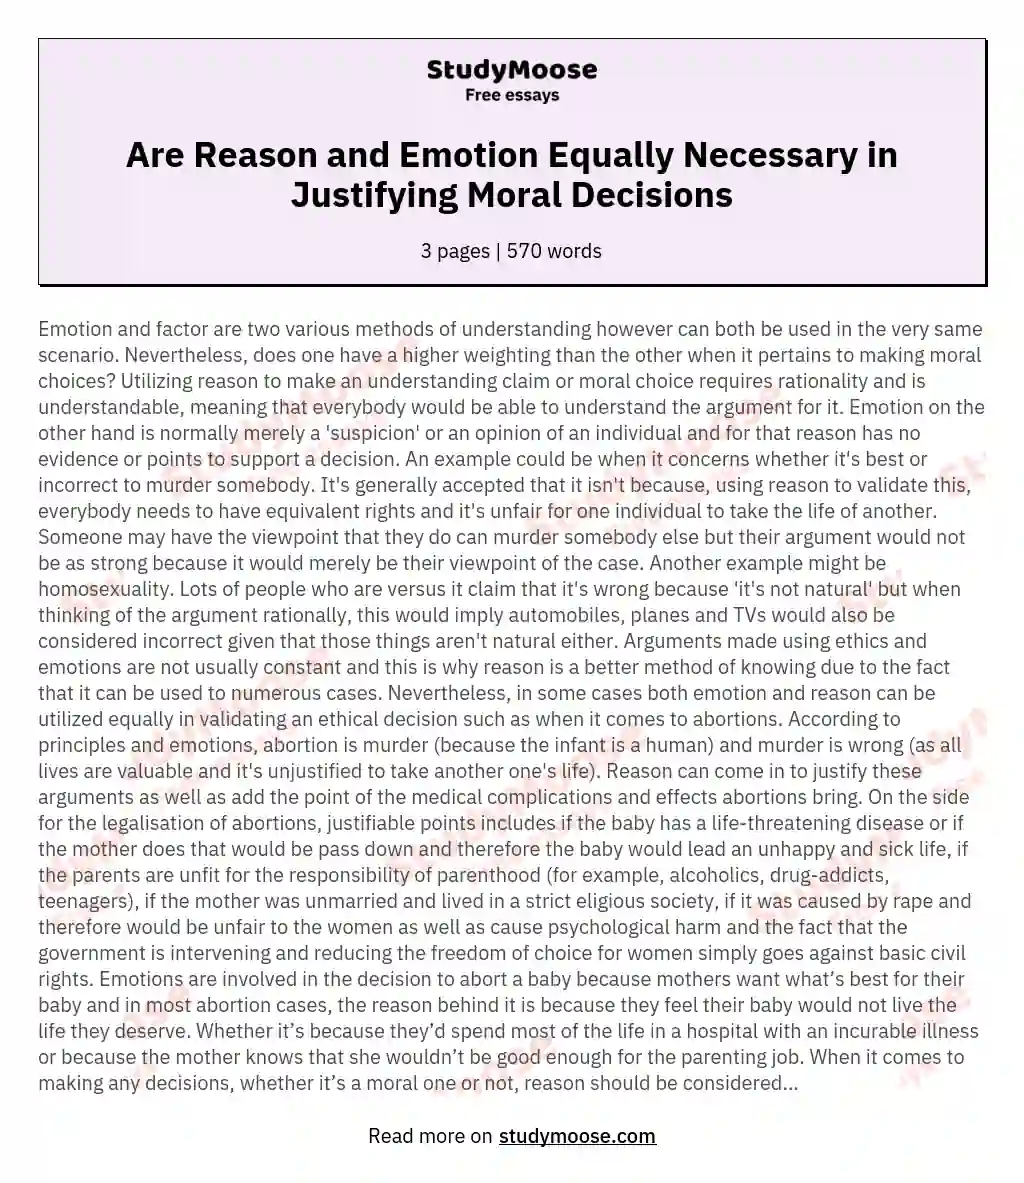 Are Reason and Emotion Equally Necessary in Justifying Moral Decisions essay